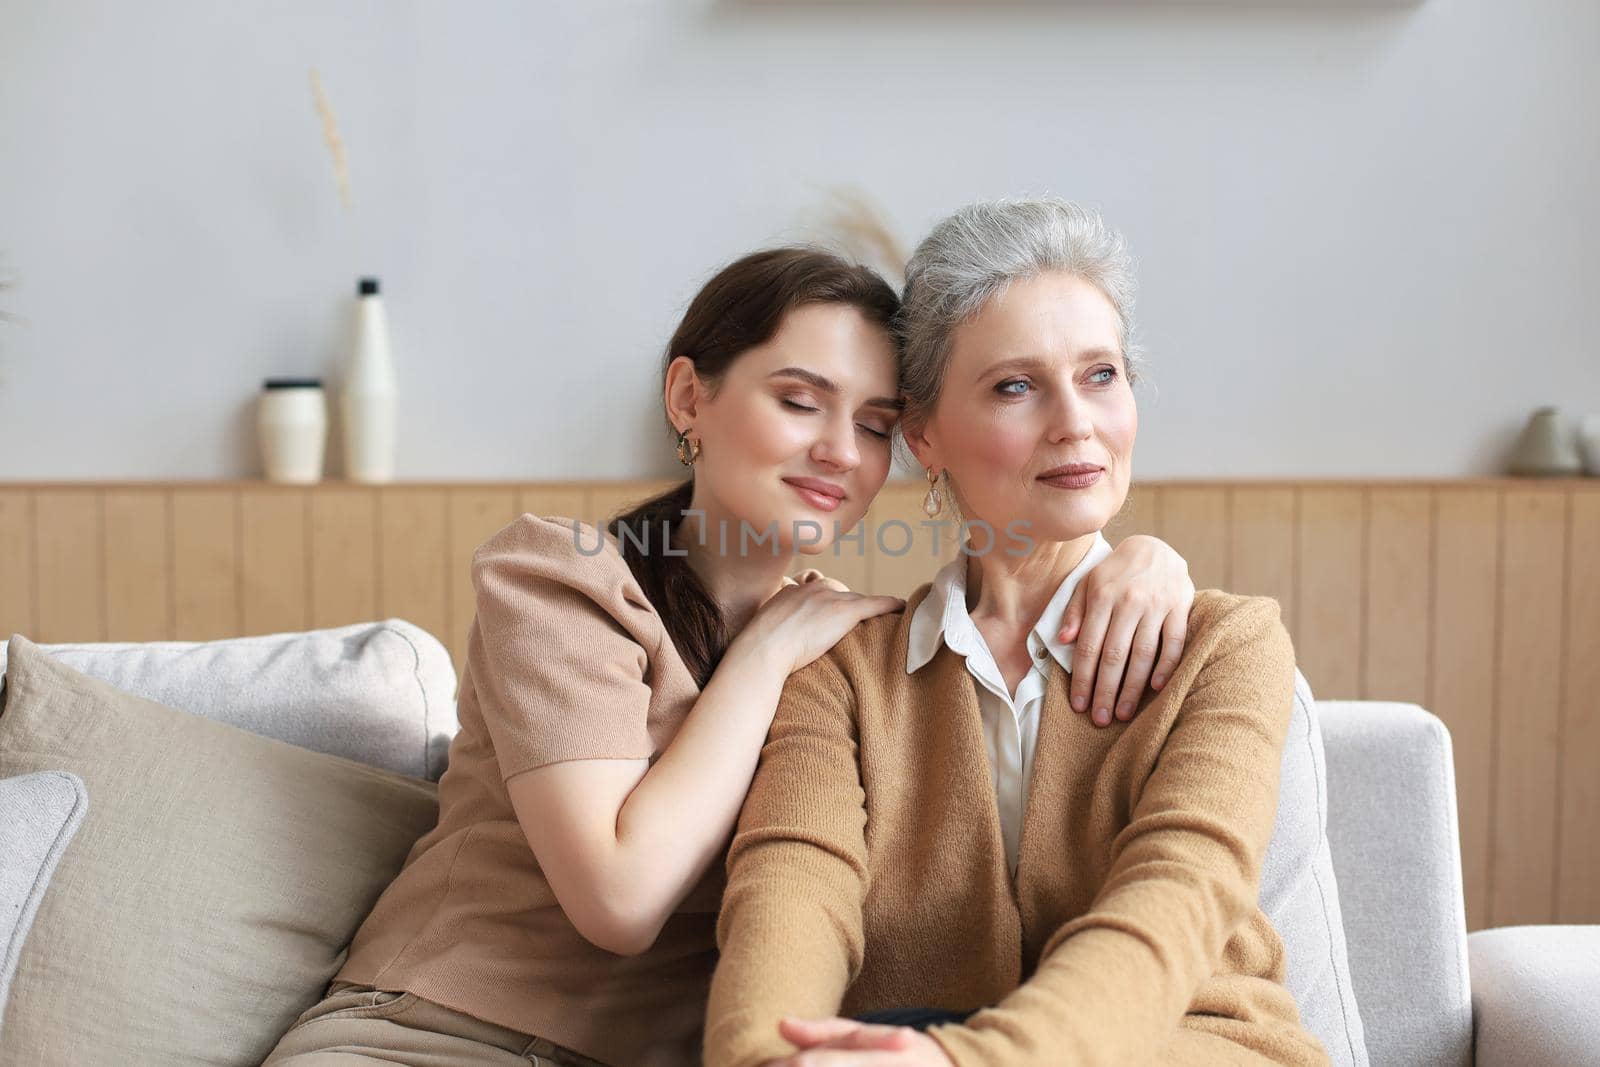 Beautiful mother and daughter. Cheerful young woman is embracing her middle aged mother in living room. Family portrait